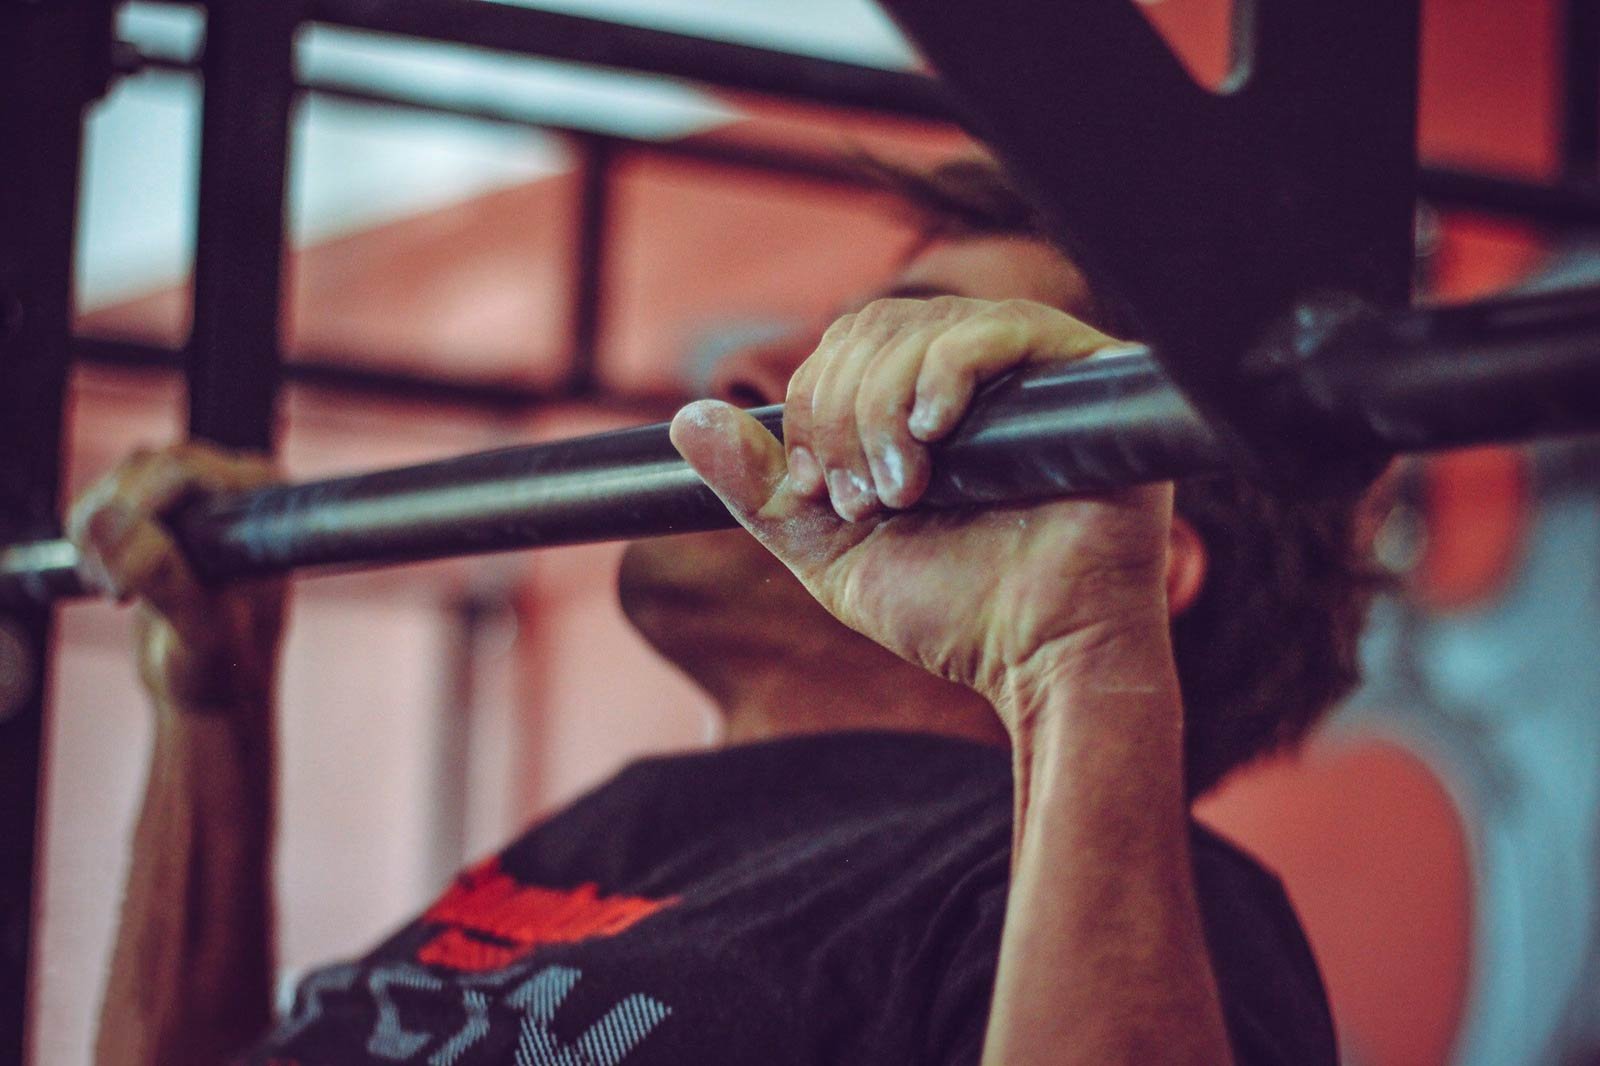 How to Get Better at Pull Ups in 30 Days or Less